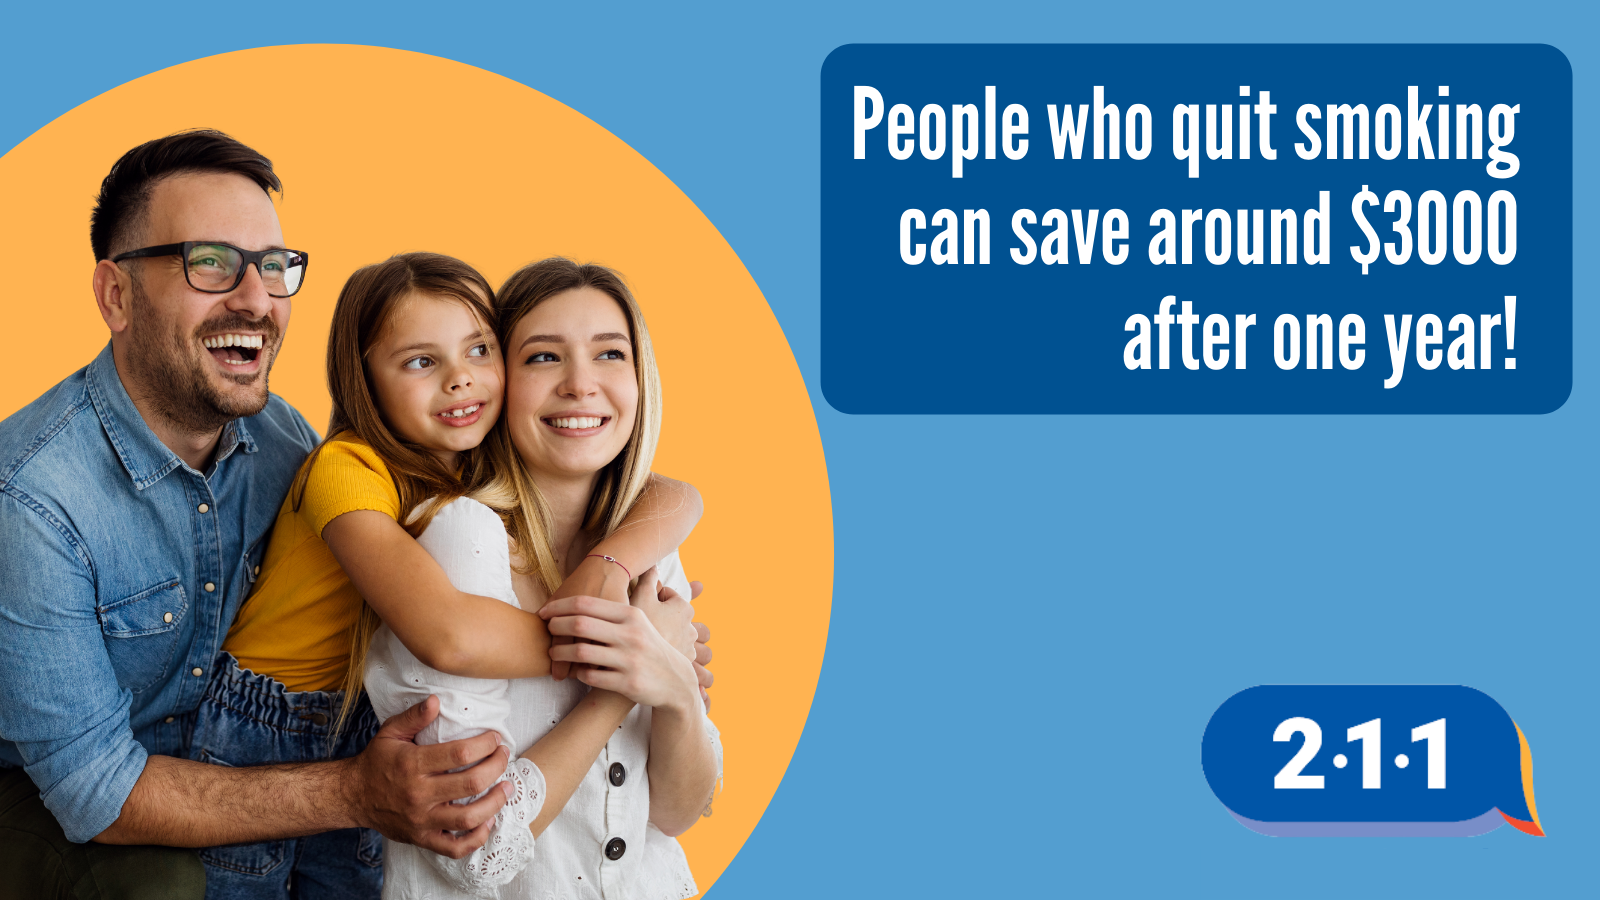 Caucasian smiling family and text: People who quit smoking can save around $3000 after one year! 2-1-1